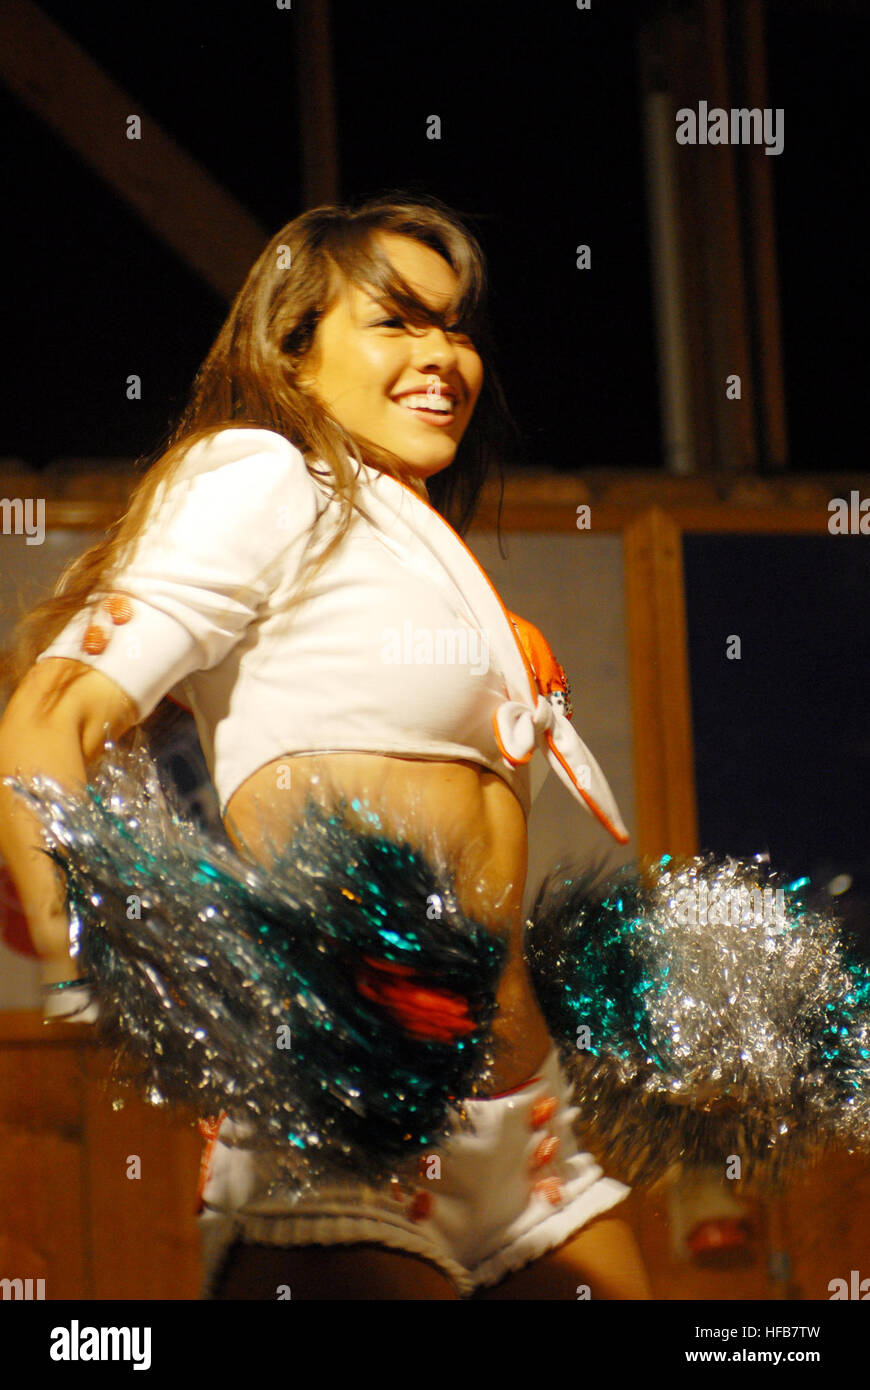 Miami Dolphins' cheerleaders entertained Soldiers, Sailors, Marines and Airmen on a tour of the area. They performed a few dance routines and signed autographs for the troops. Dolphins cheerleaders Djibouti 9 Stock Photo